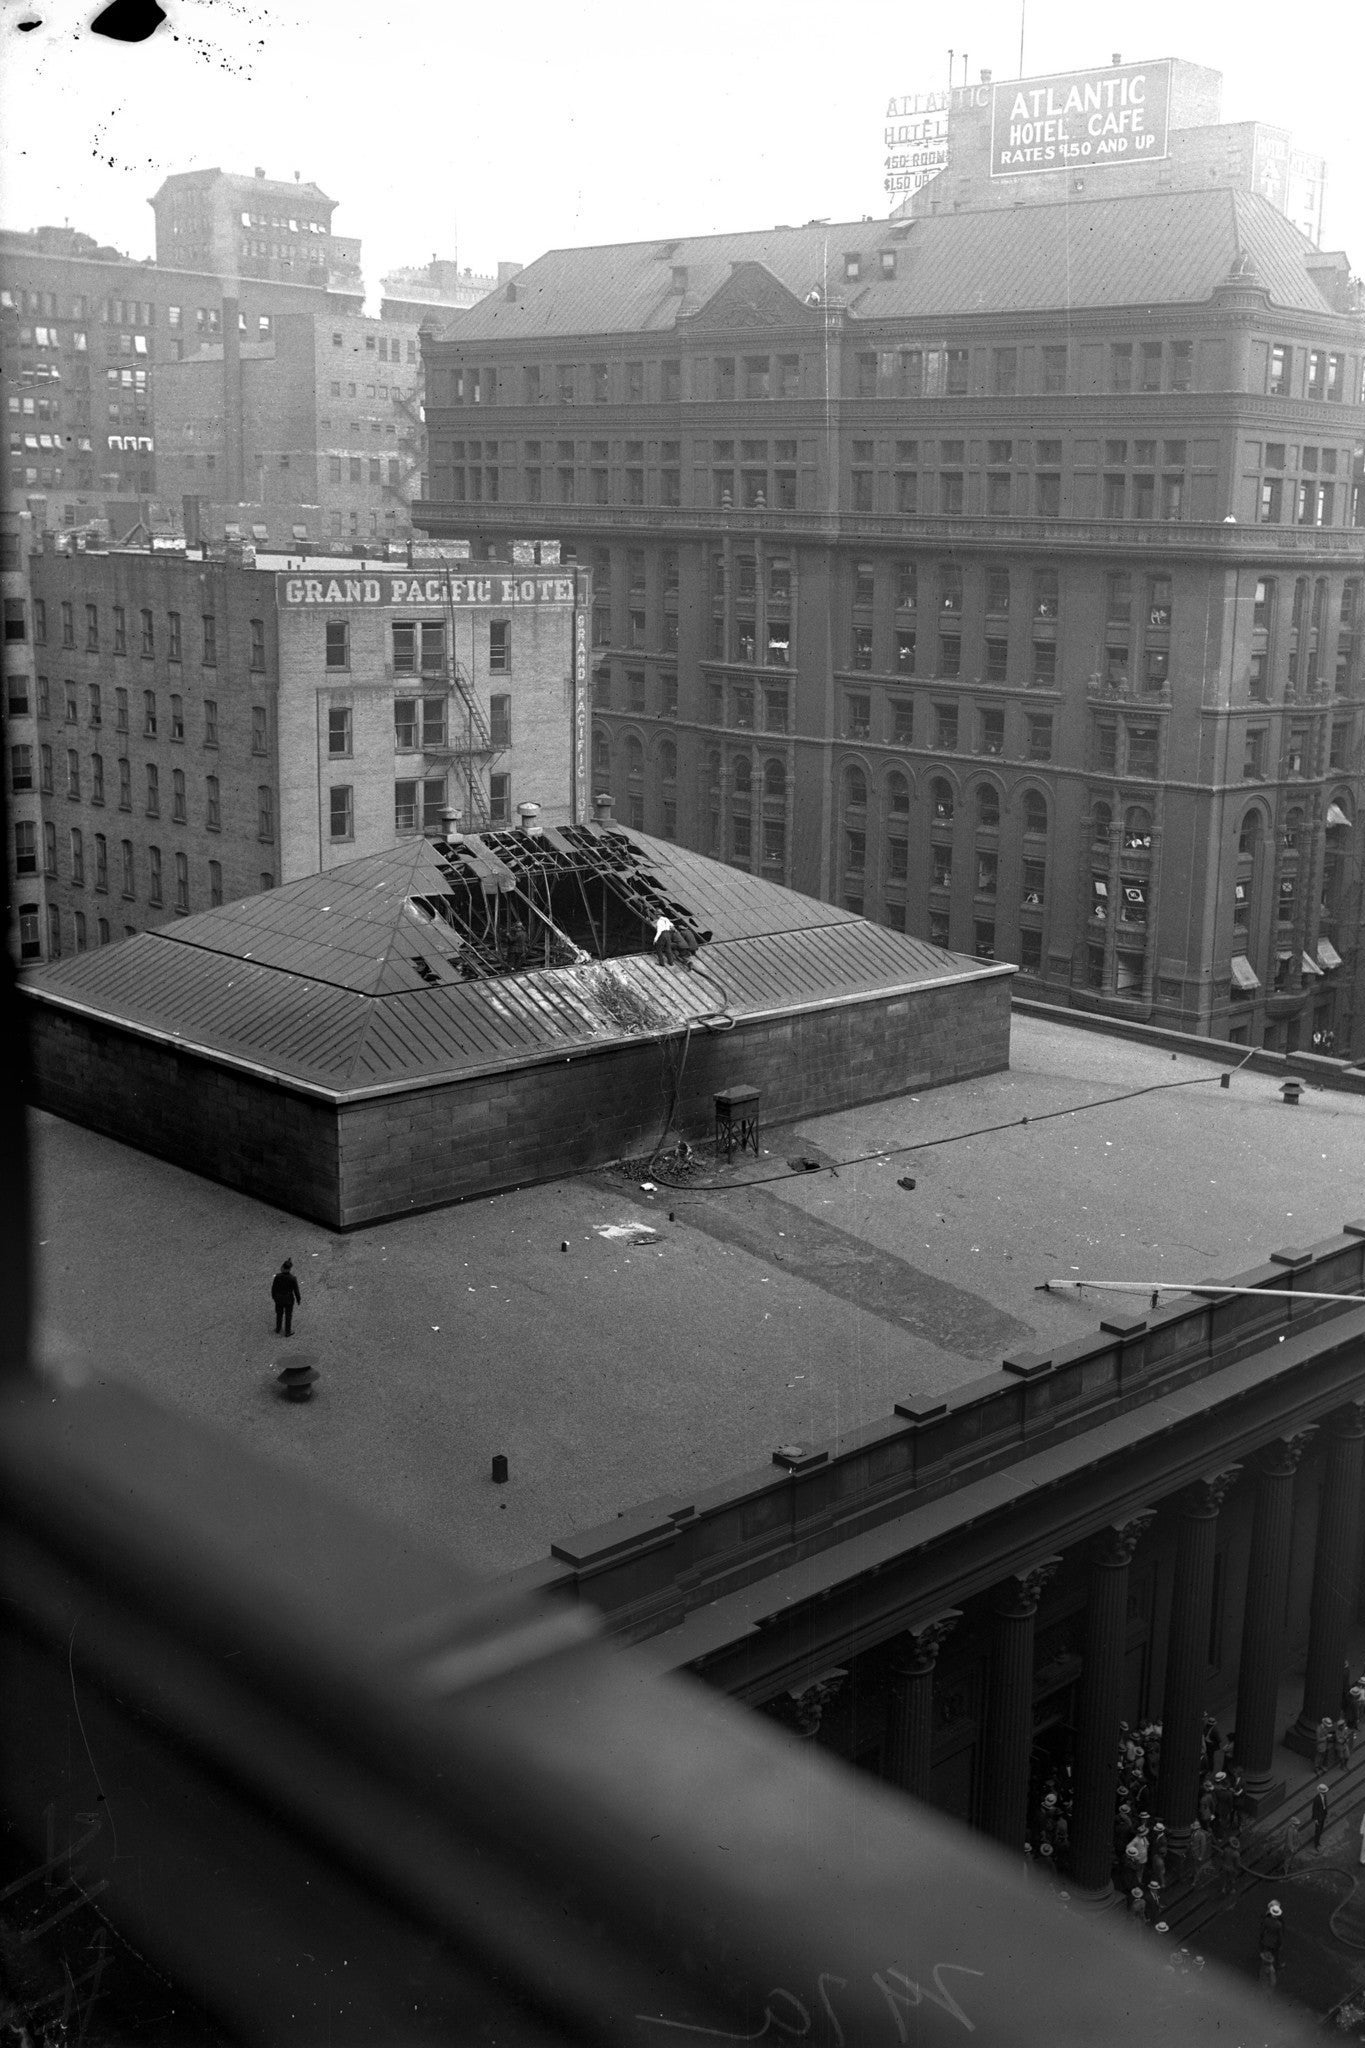 The roof of the bank after the crash, showing a blimp-sized hole in the skylight.